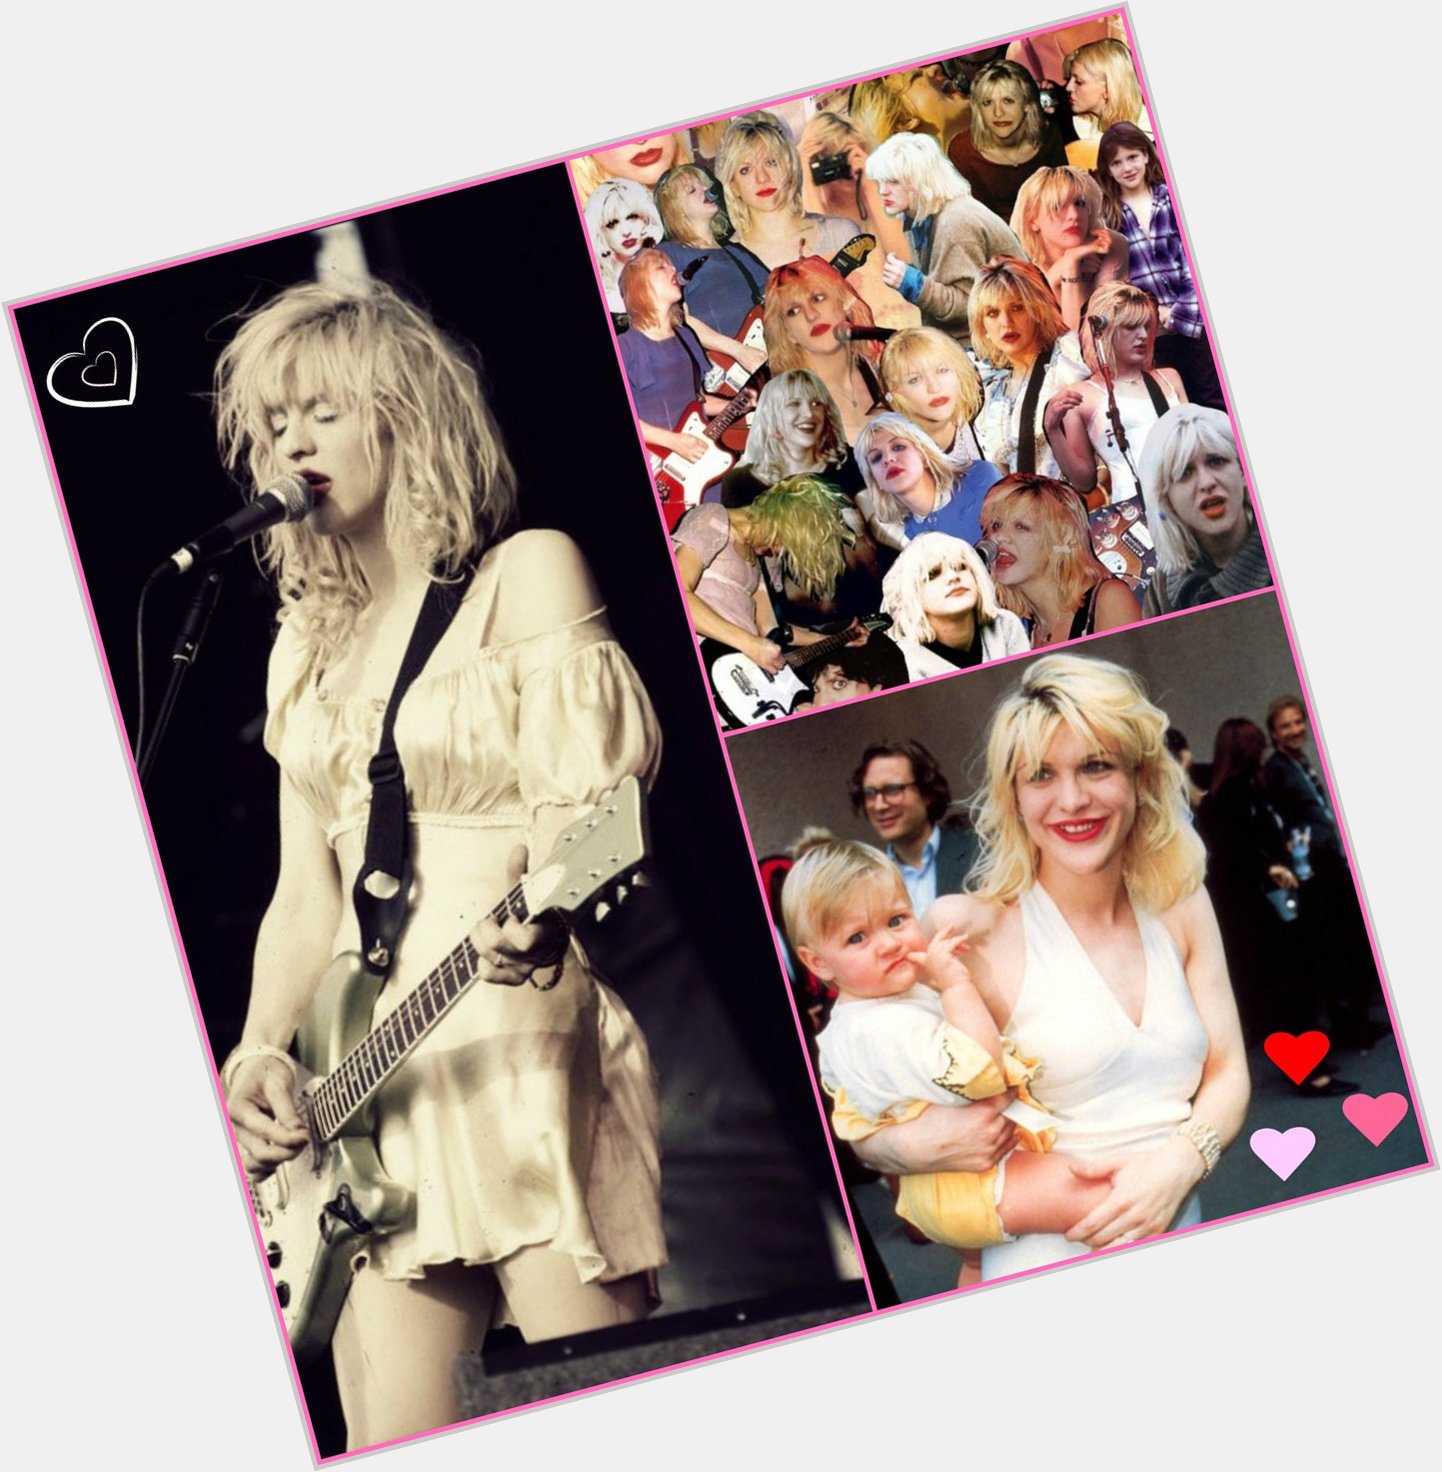 Happy birthday to the one and only miss world, girl with the most cake- Courtney Love.   